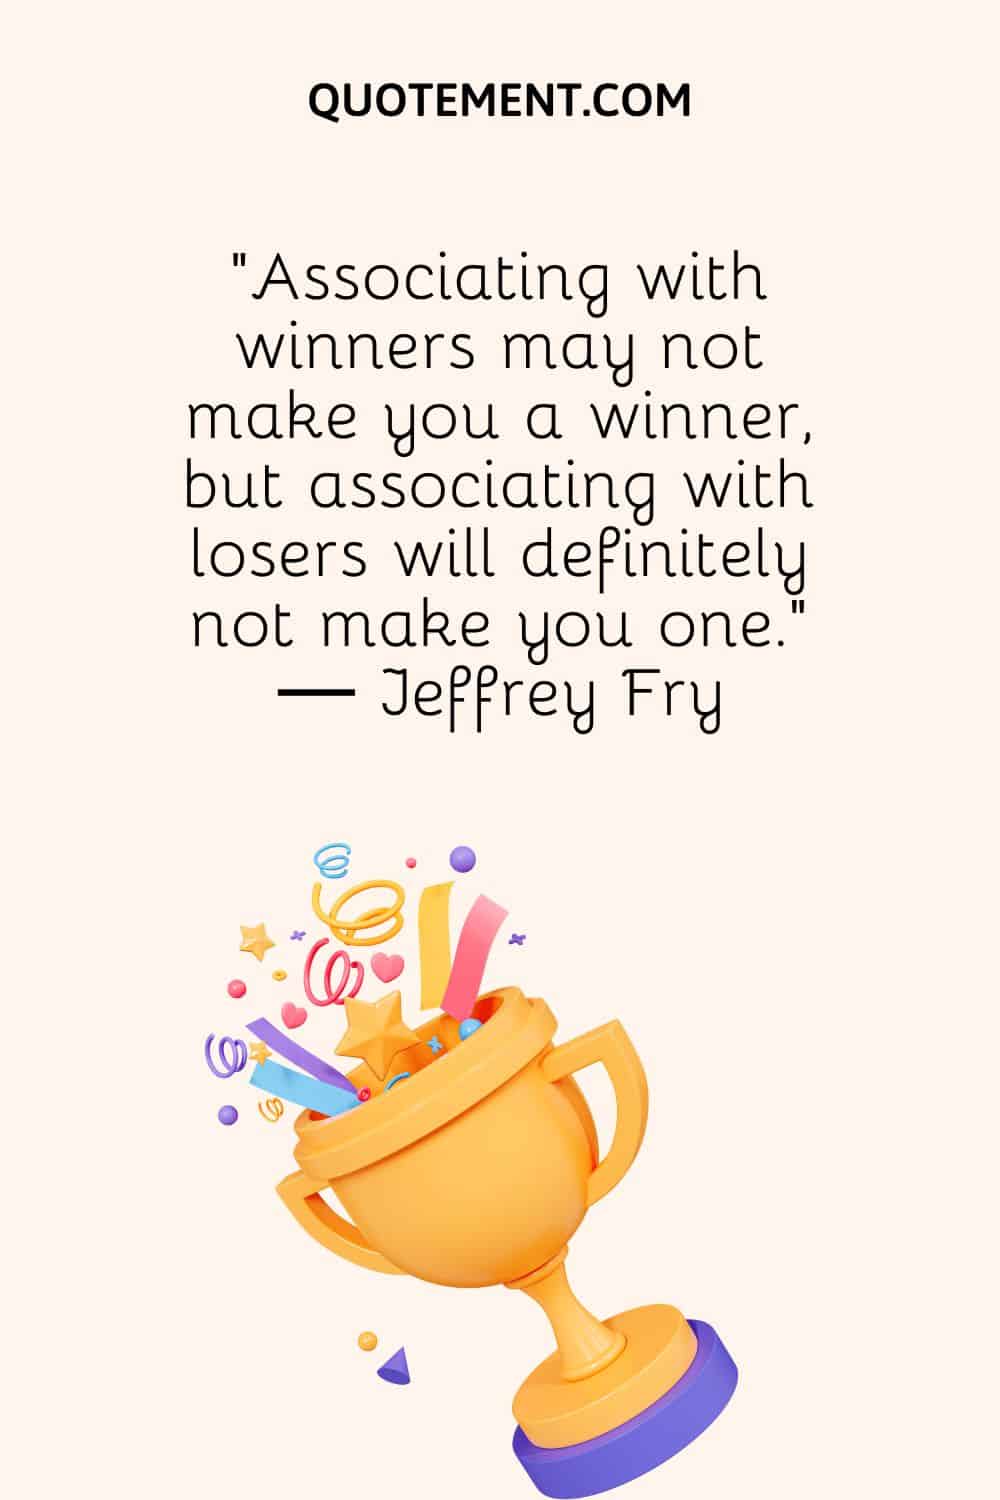 trophy illustration representing funny quote about winning